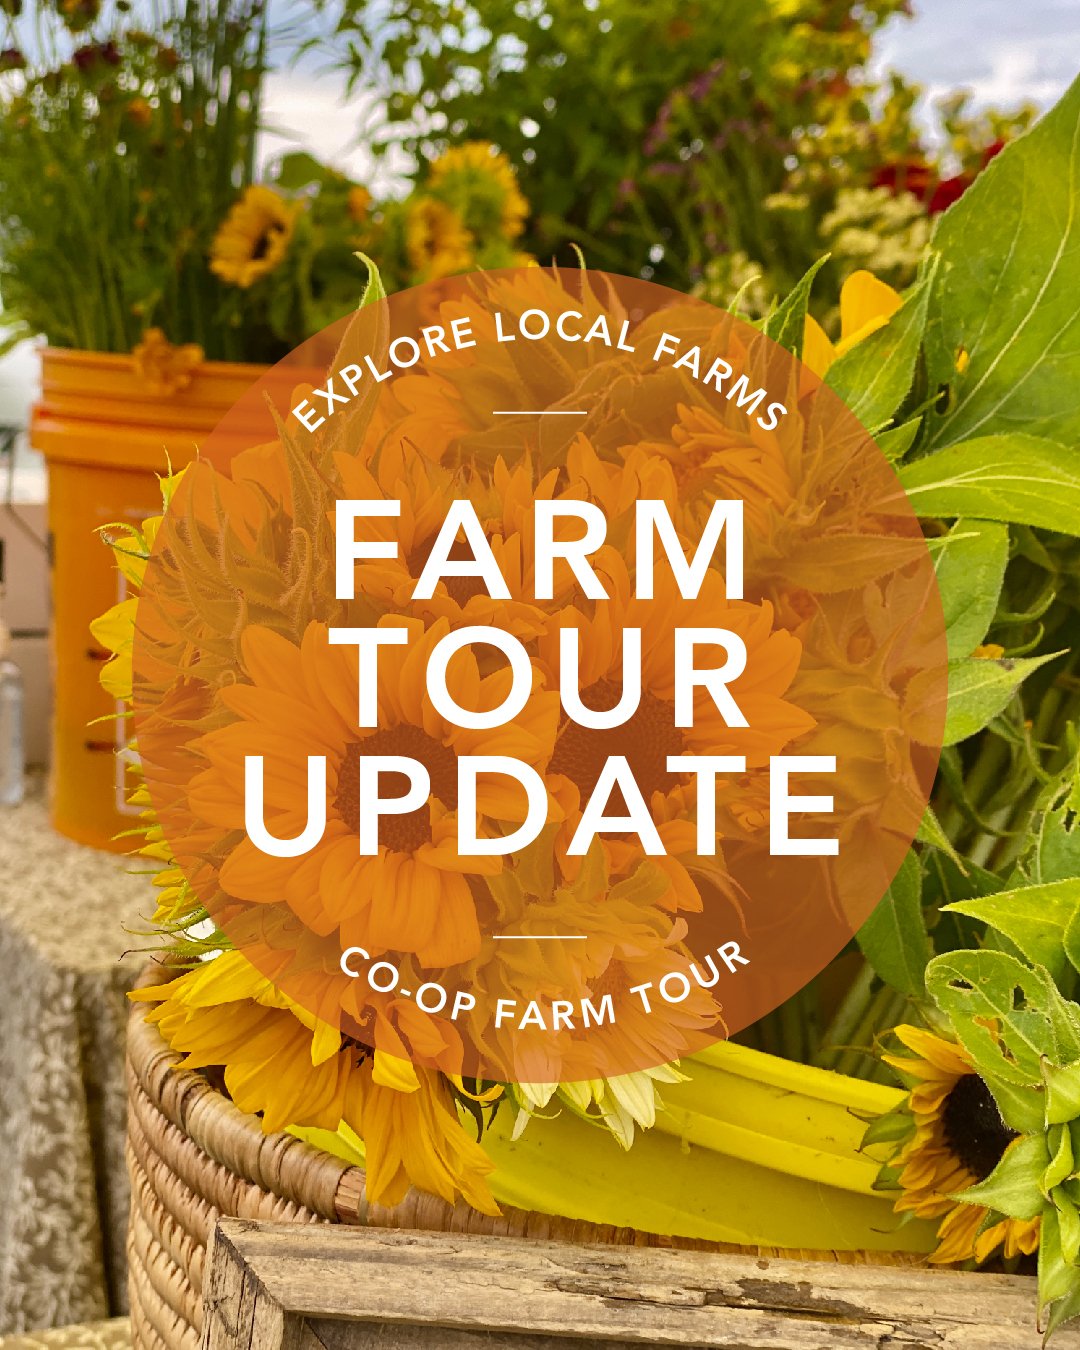 The Co-op Farm Tour has been a day of family-friendly fun and learning on the farm for more than a decade. This year, the Co-op Farm Tour is taking a hiatus for the sponsoring co-ops to reevaluate the format, timing, and frequency of the event. Altho